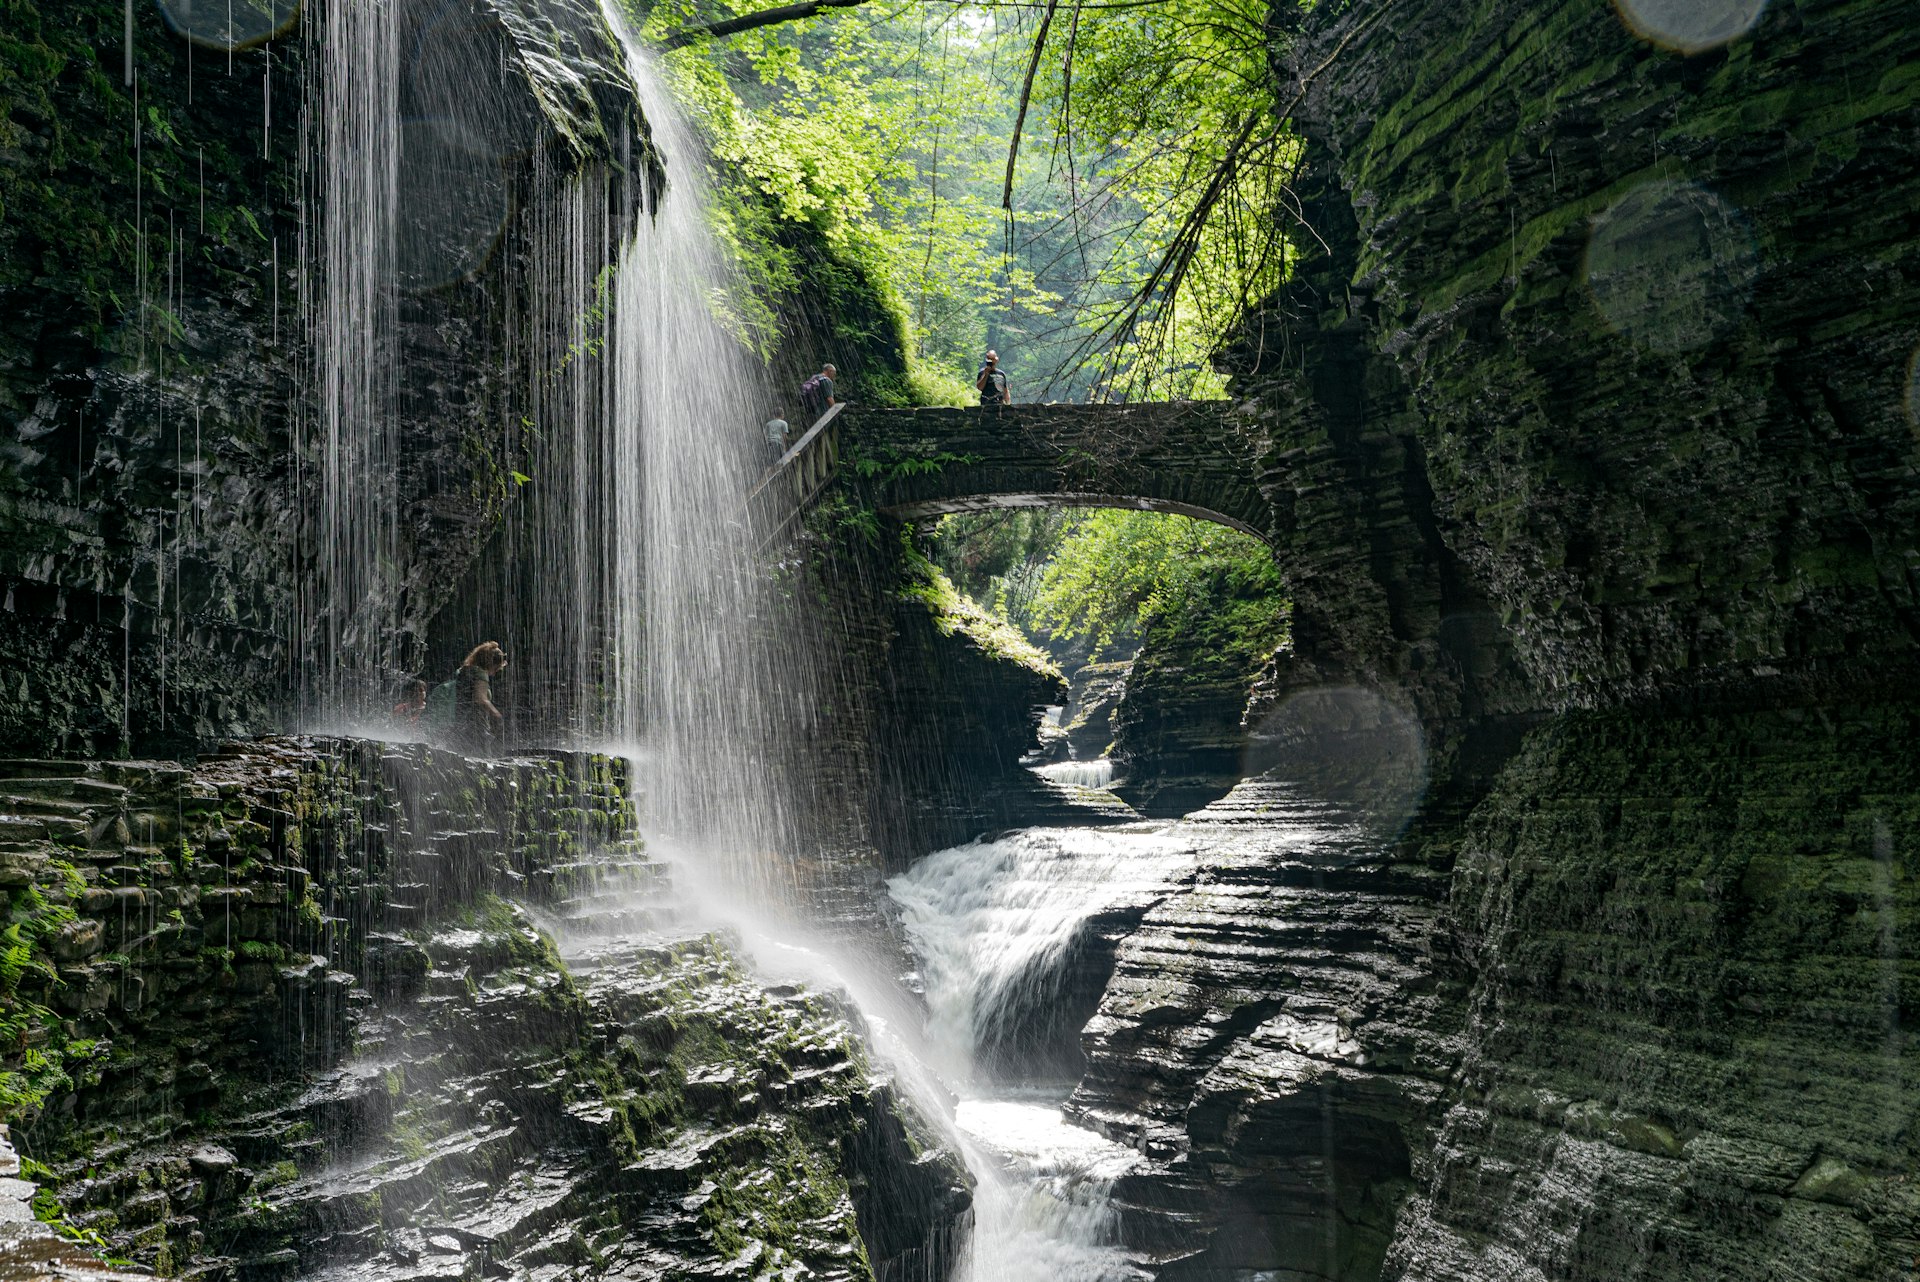 Water splashes over rocks at Buttermilk Falls State Park, New York State